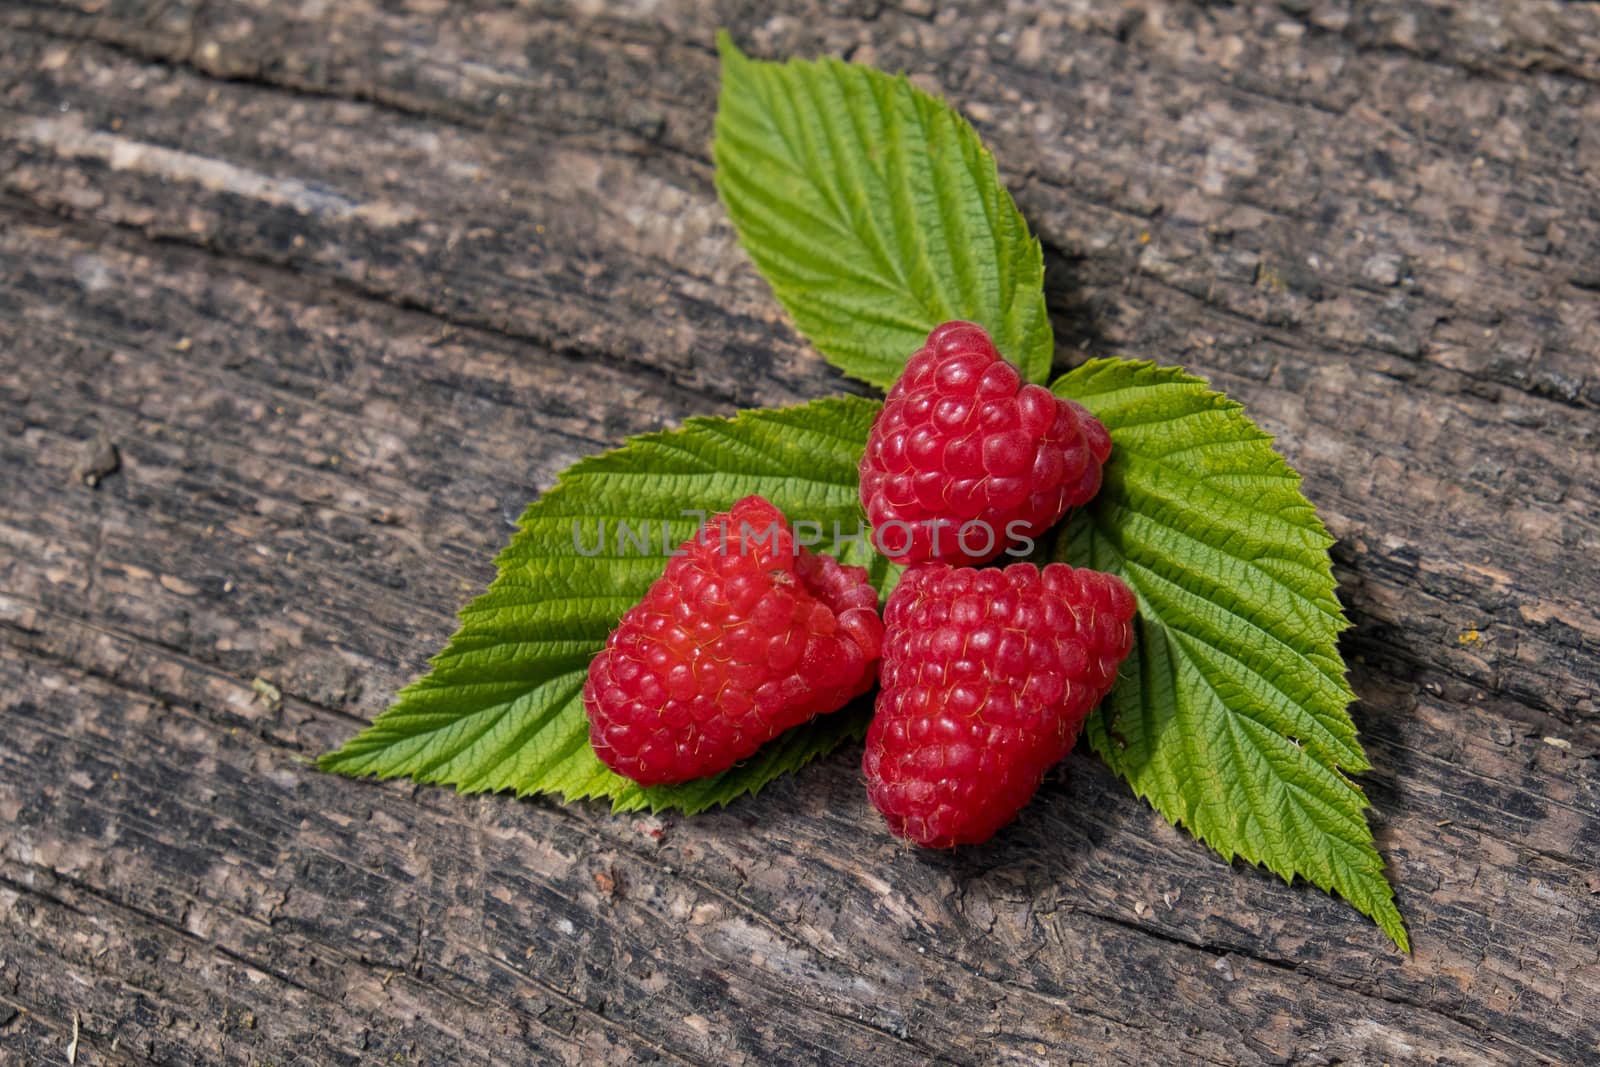 Ripe aromatic raspberries on a wooden background.